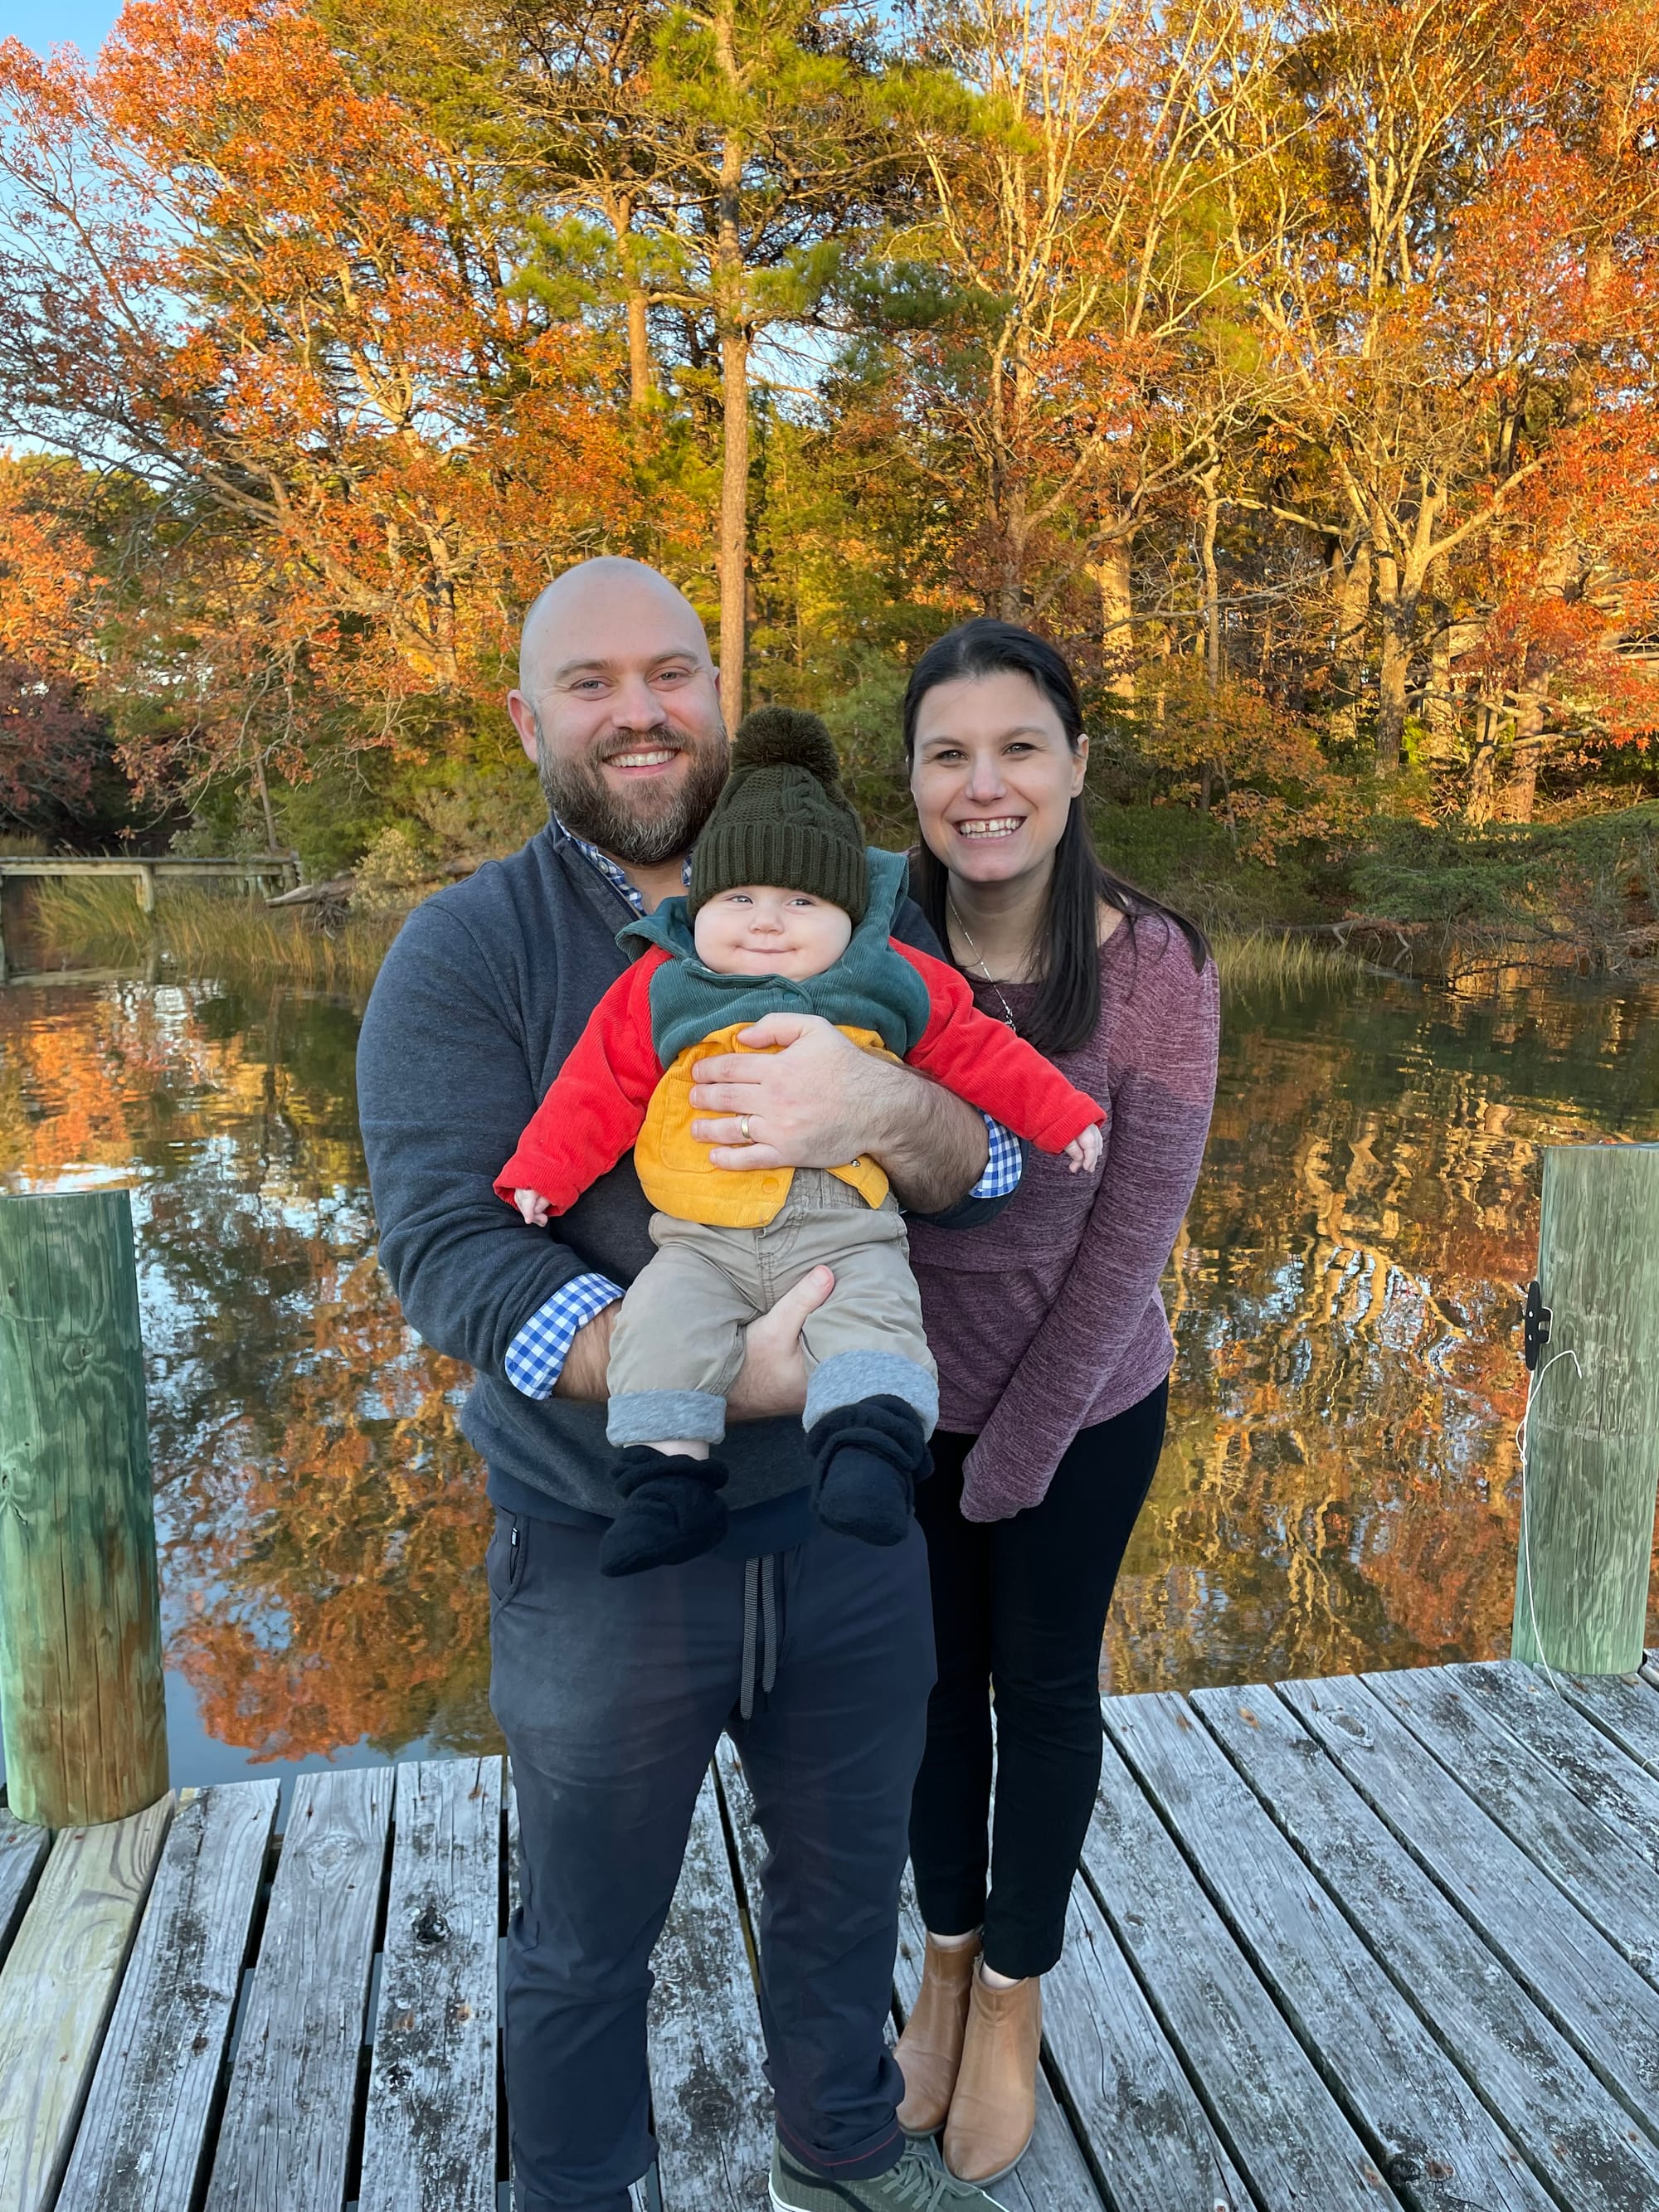 Frank and his family standing on a dock with fall foliage in the background.